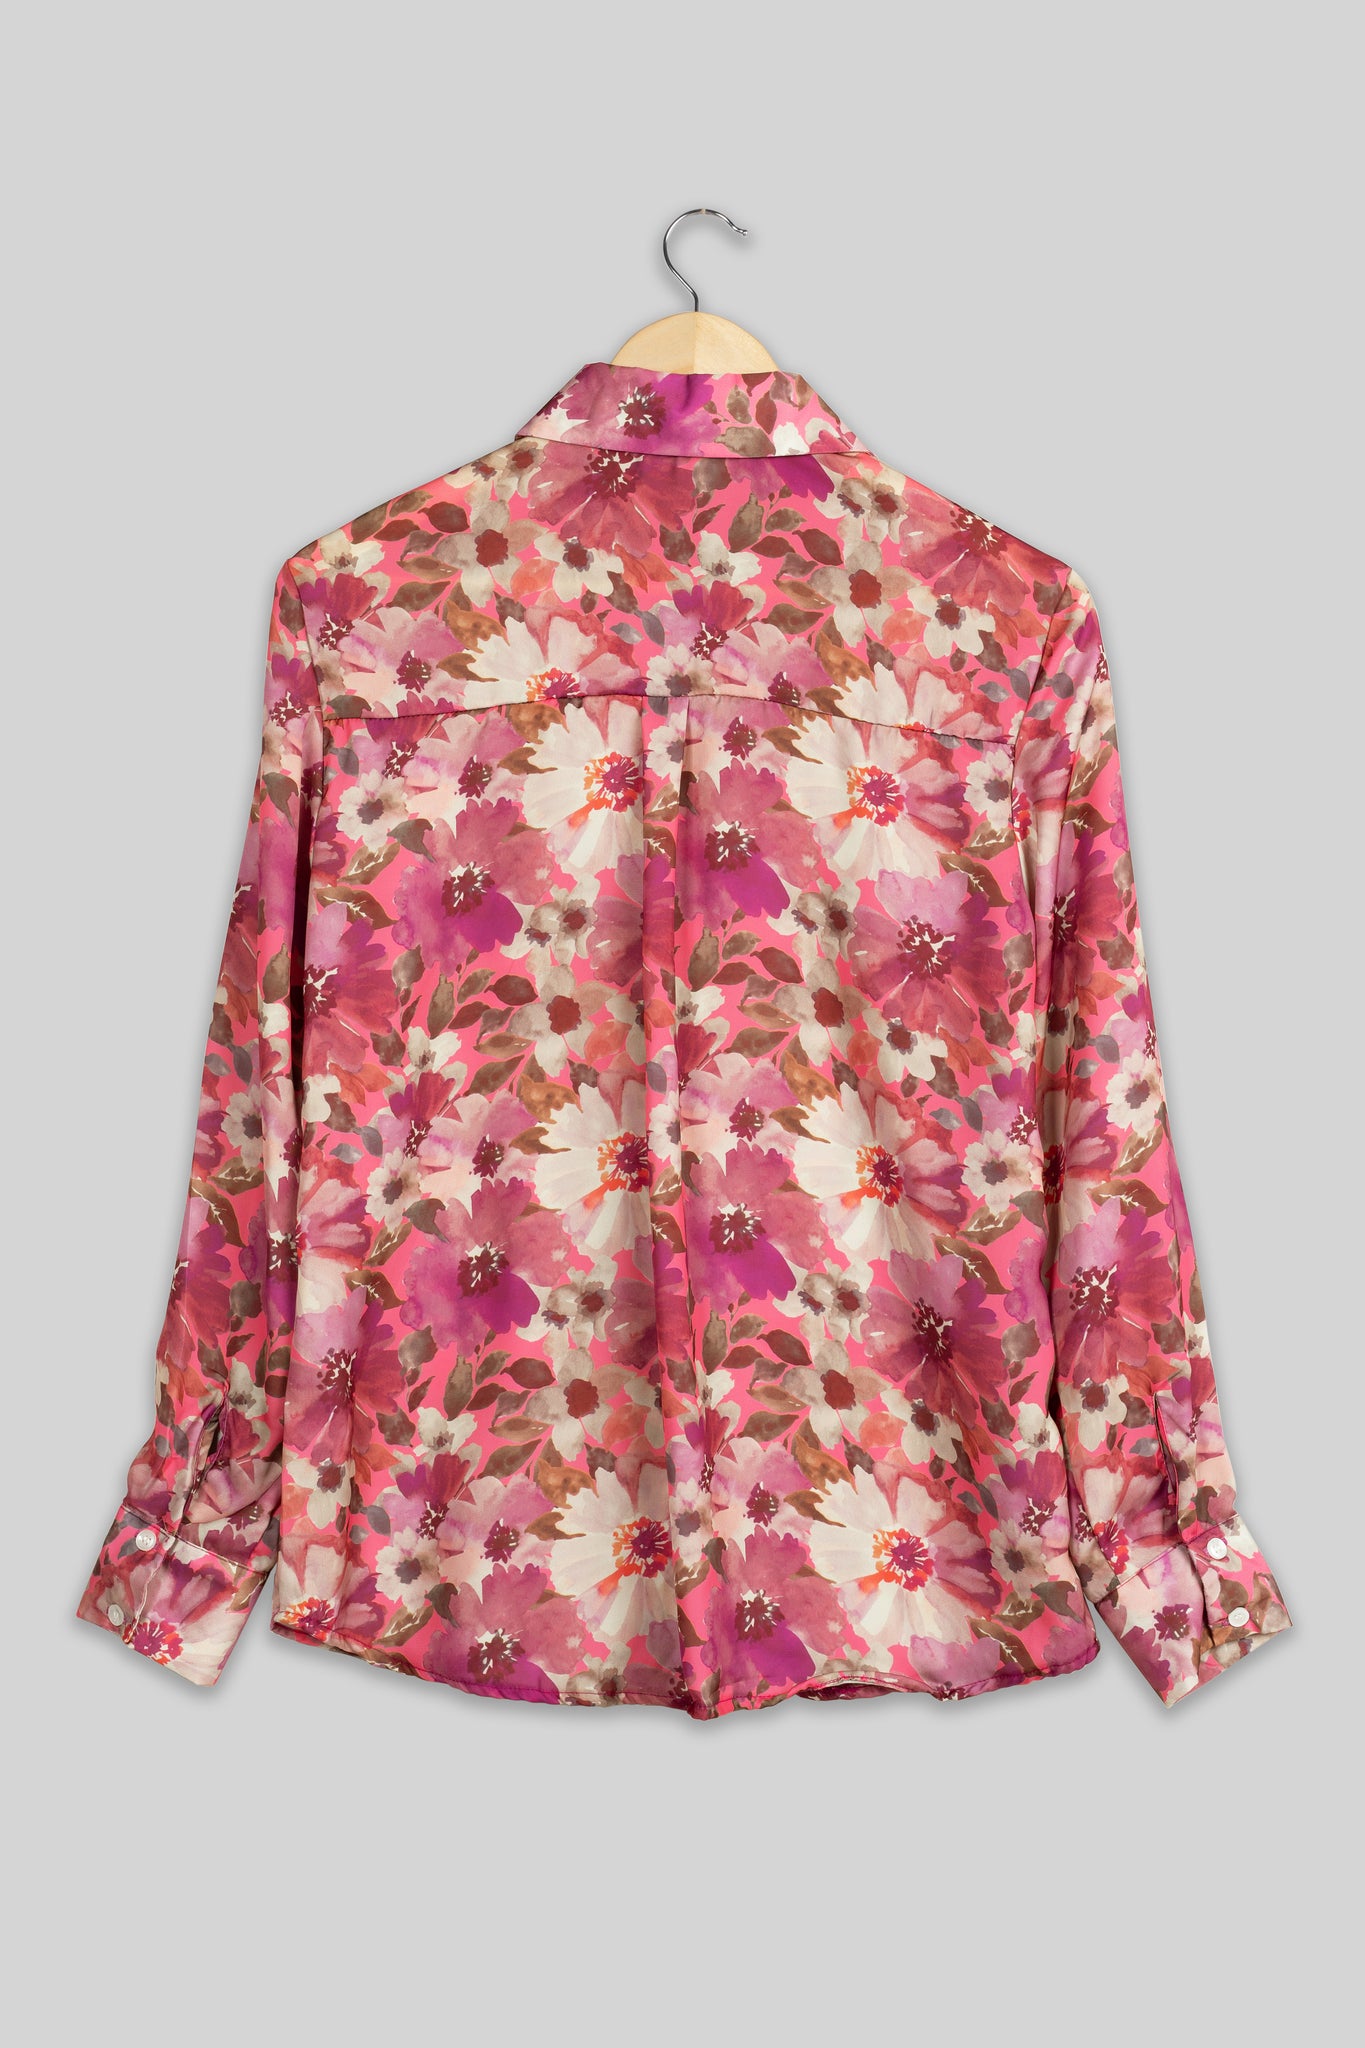 Bestselling Floral Shirt For Women